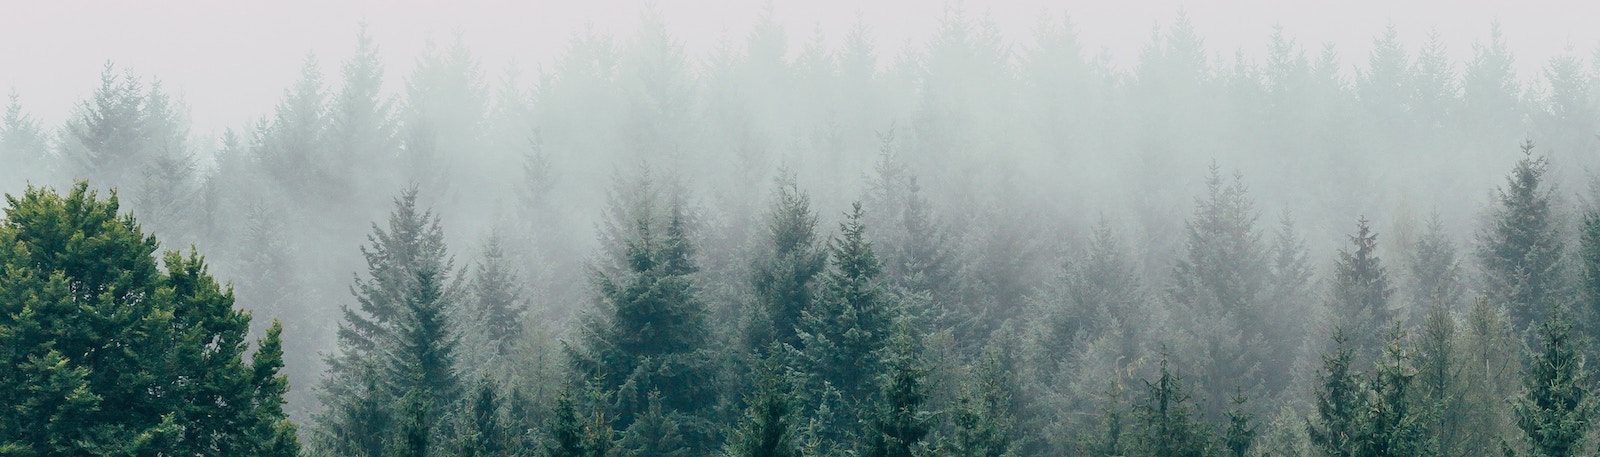 Forest of evergreen trees with fog.